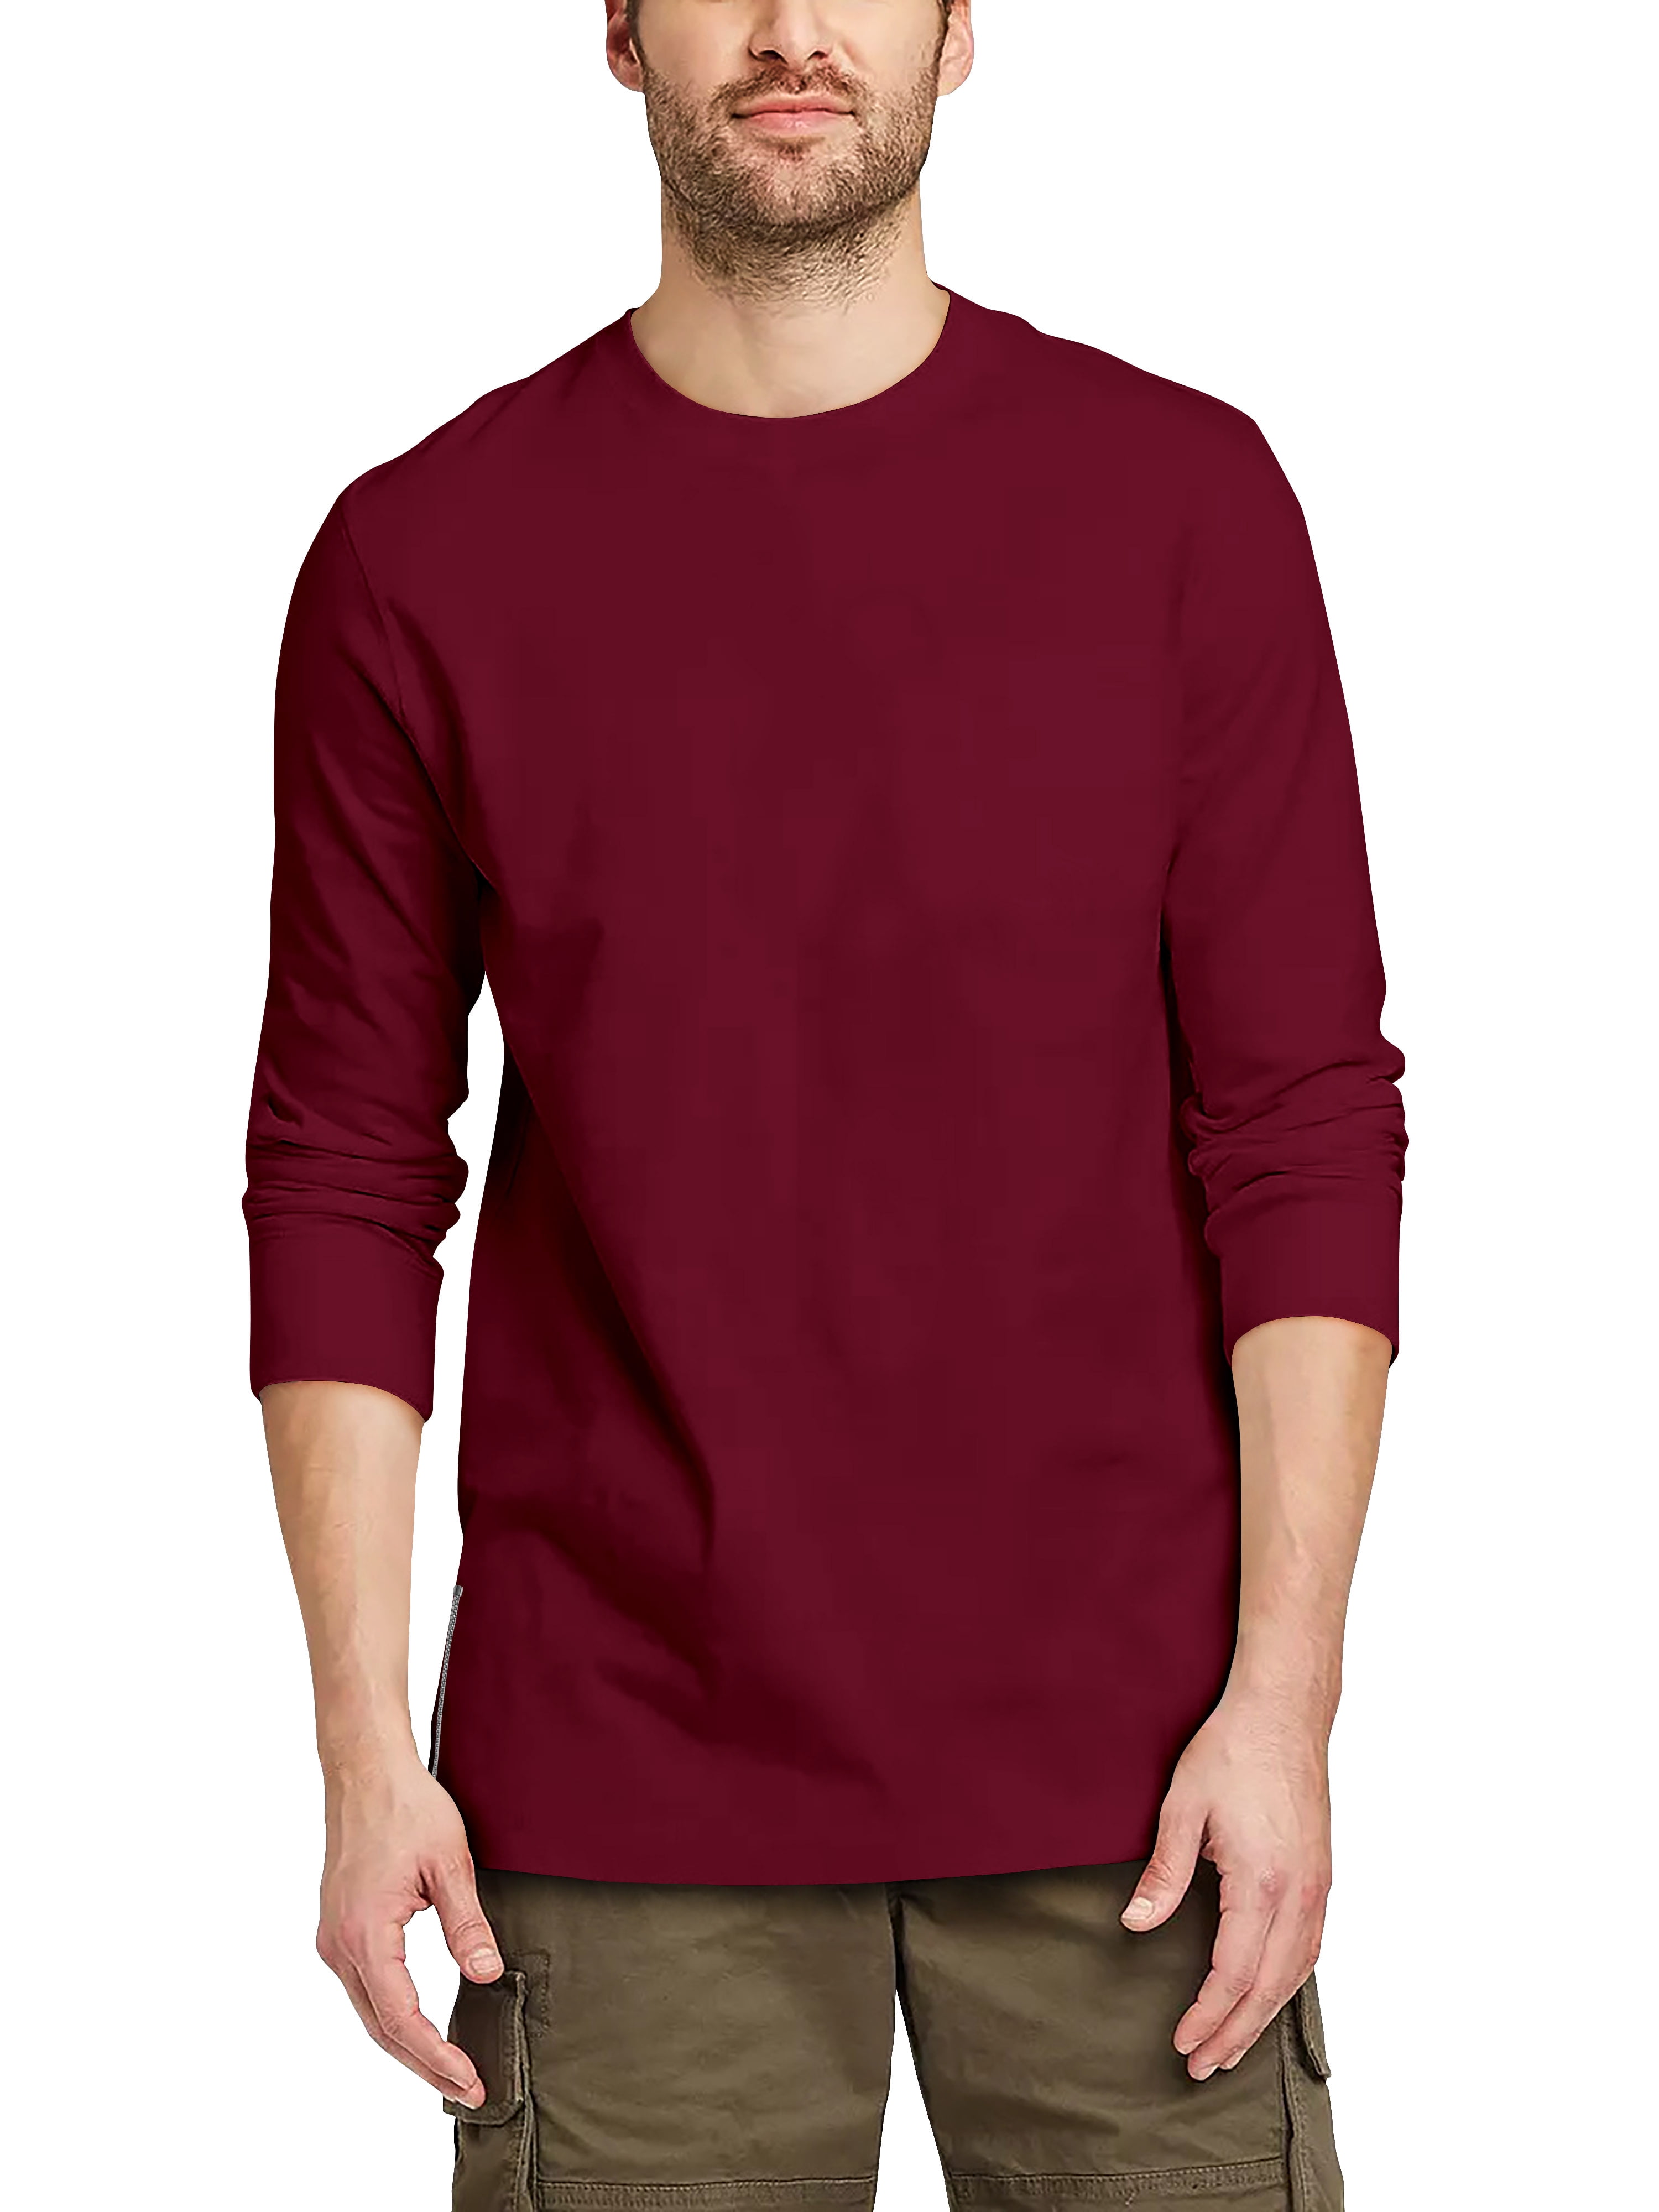 Coolred-Men Casual Reg and Big and Tall Sizes Hipster Nightclub Shirts